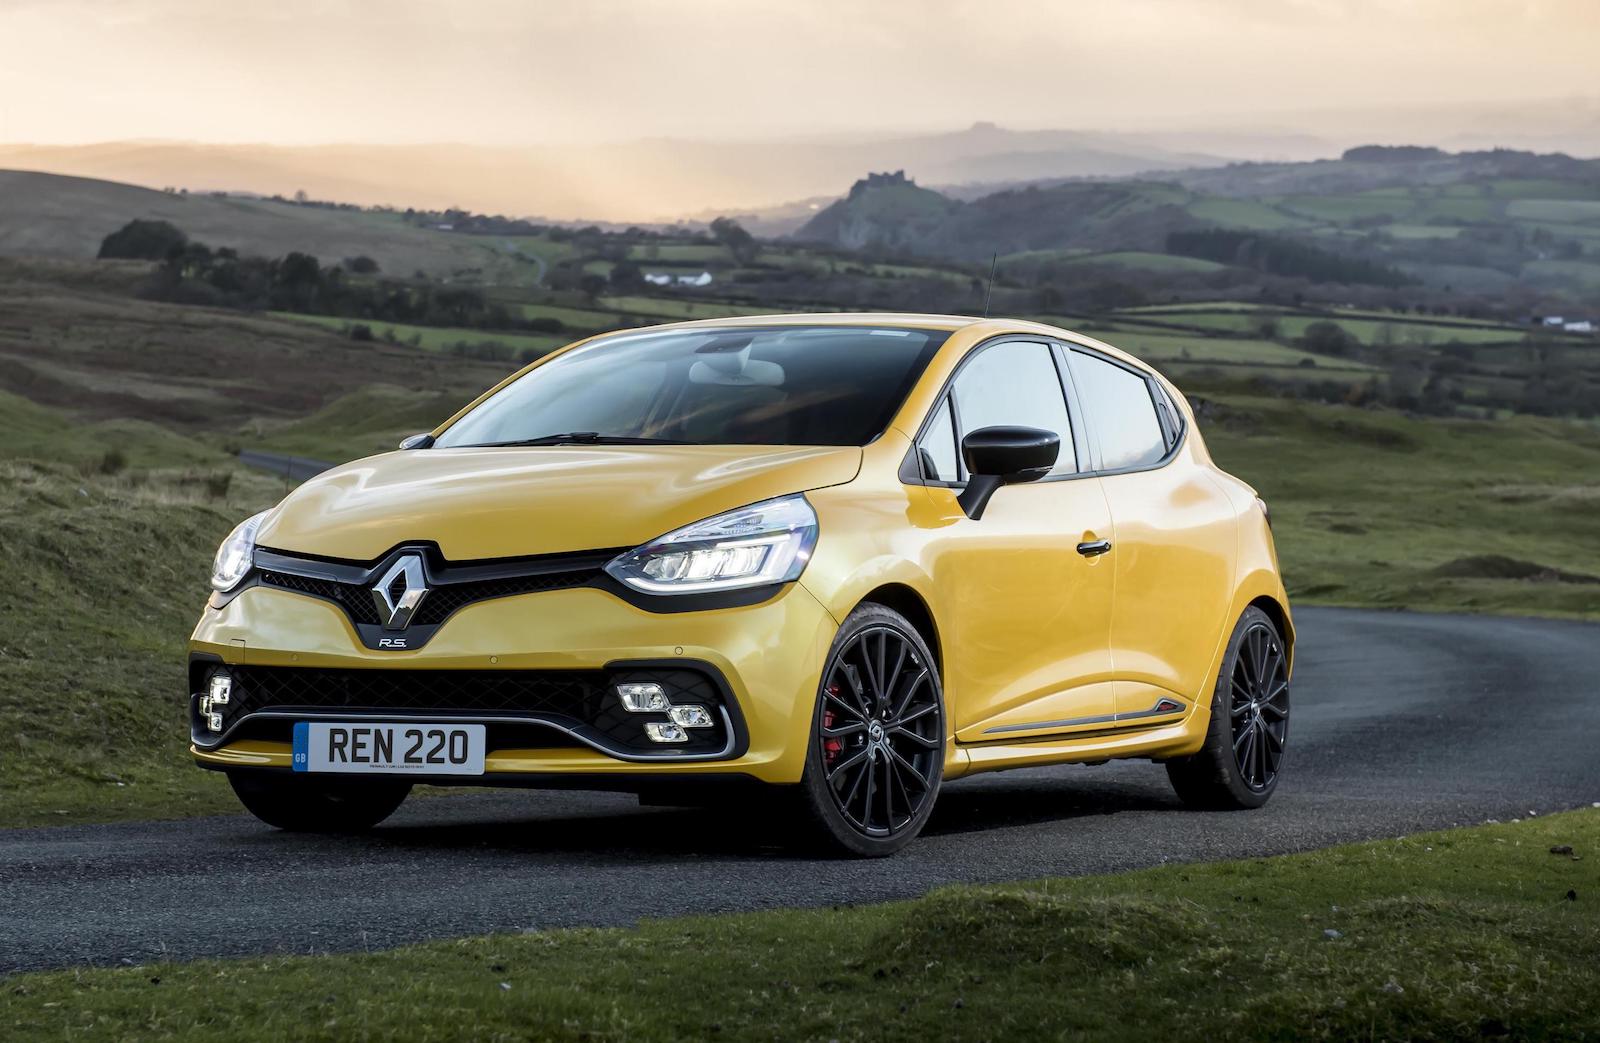 2018 Renault Clio R.S. Trophy now on sale in Australia